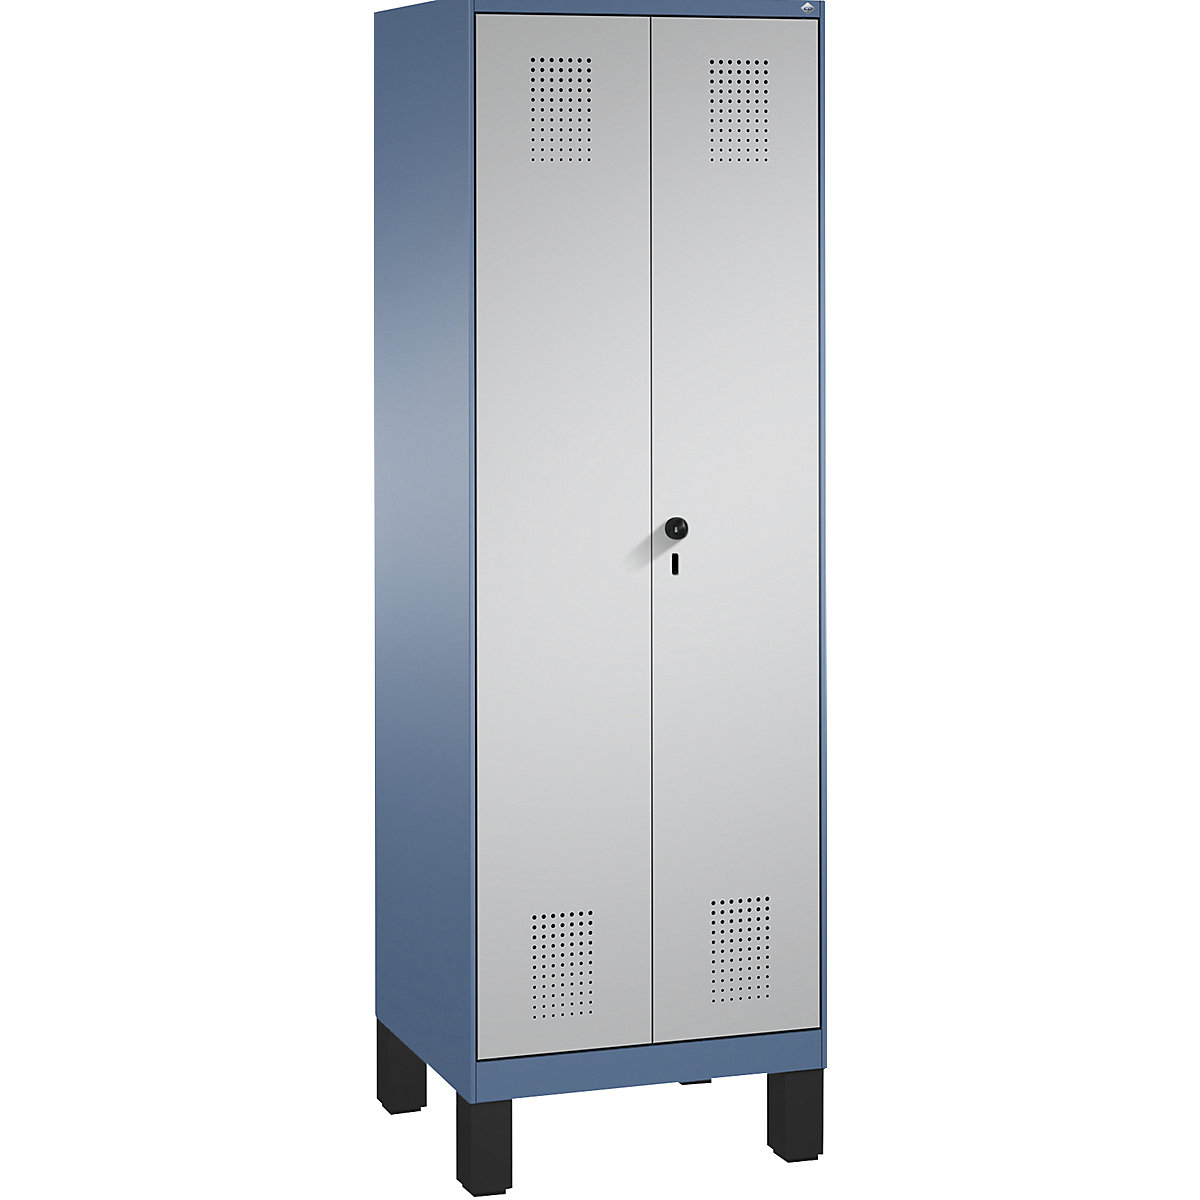 EVOLO cloakroom locker, doors close in the middle - C+P